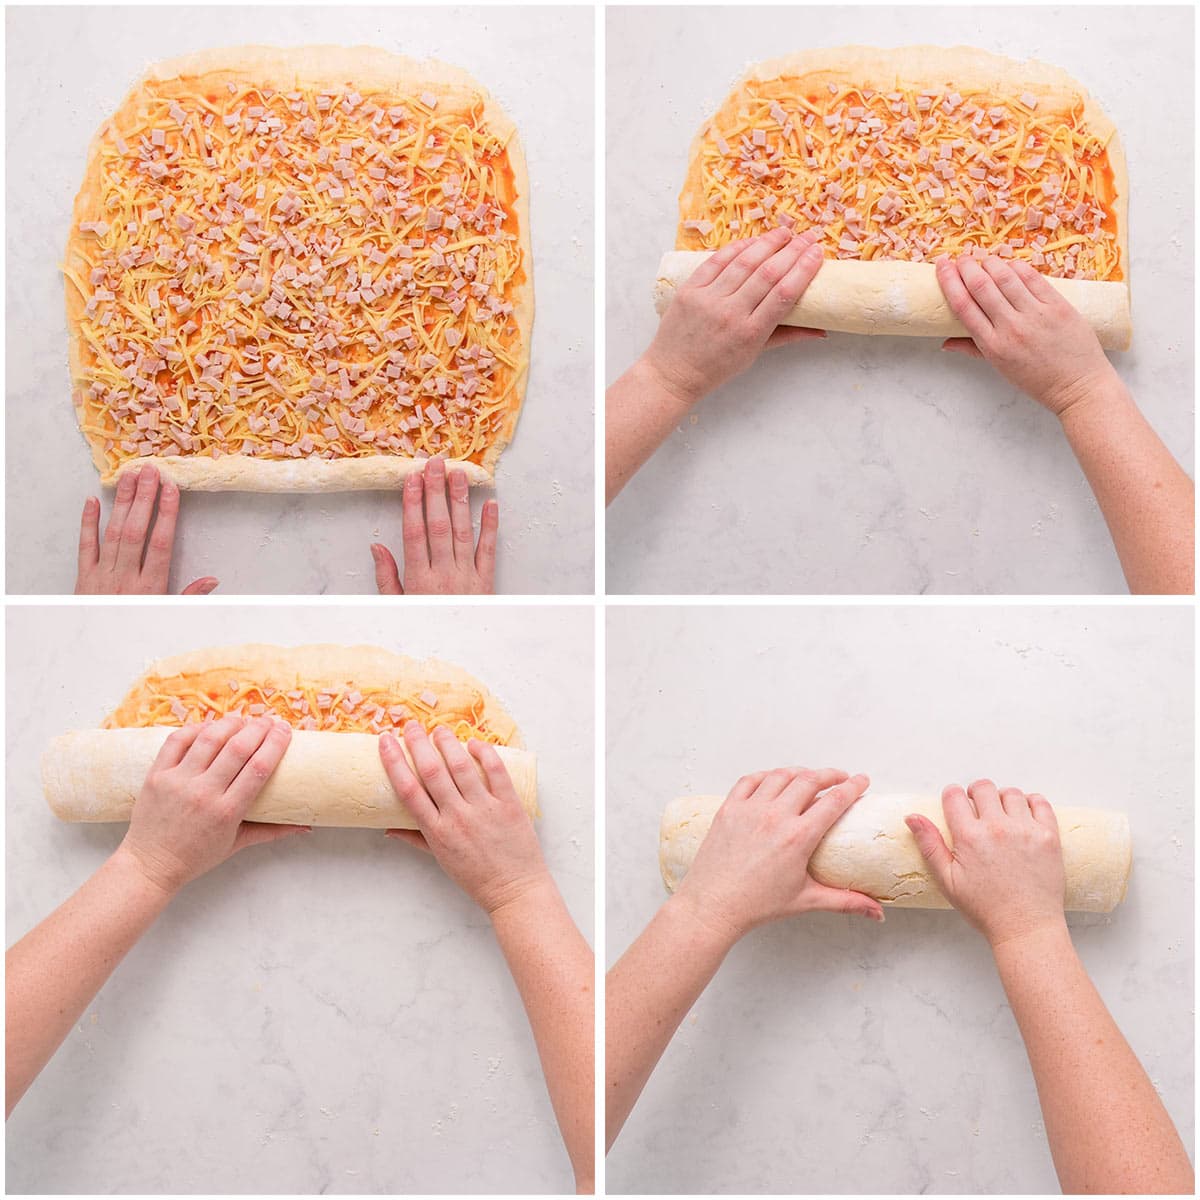 A four-image collage showing the dough and filling being rolled up.